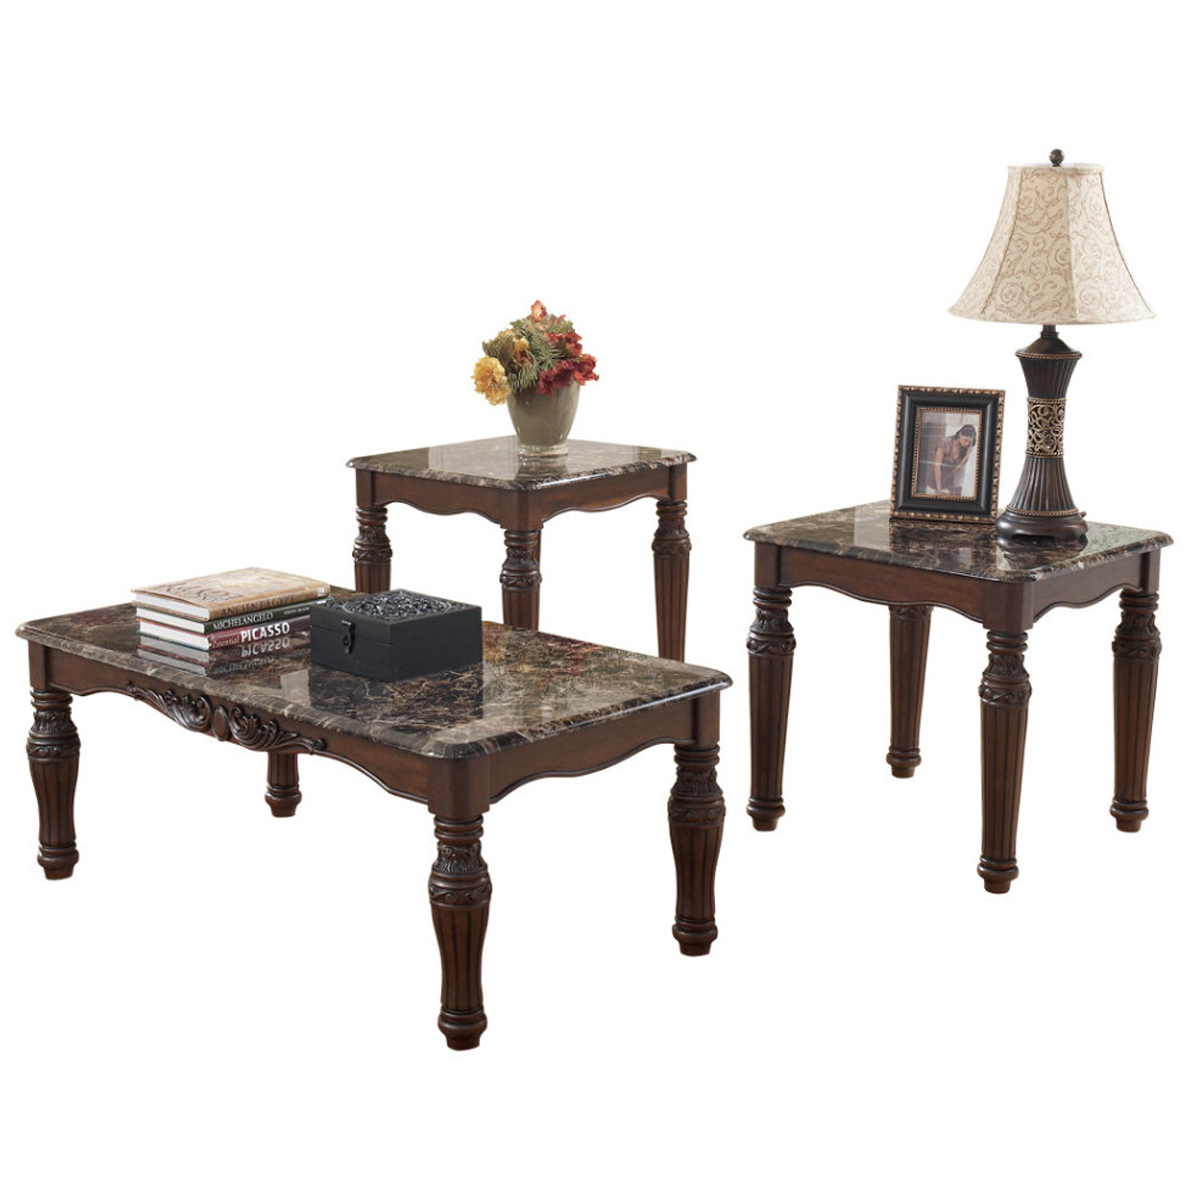 Traditional Style Wooden Table Set With Turned Legs And Faux Marble Top, Set Of Three, Dark Brown- Saltoro Sherpi